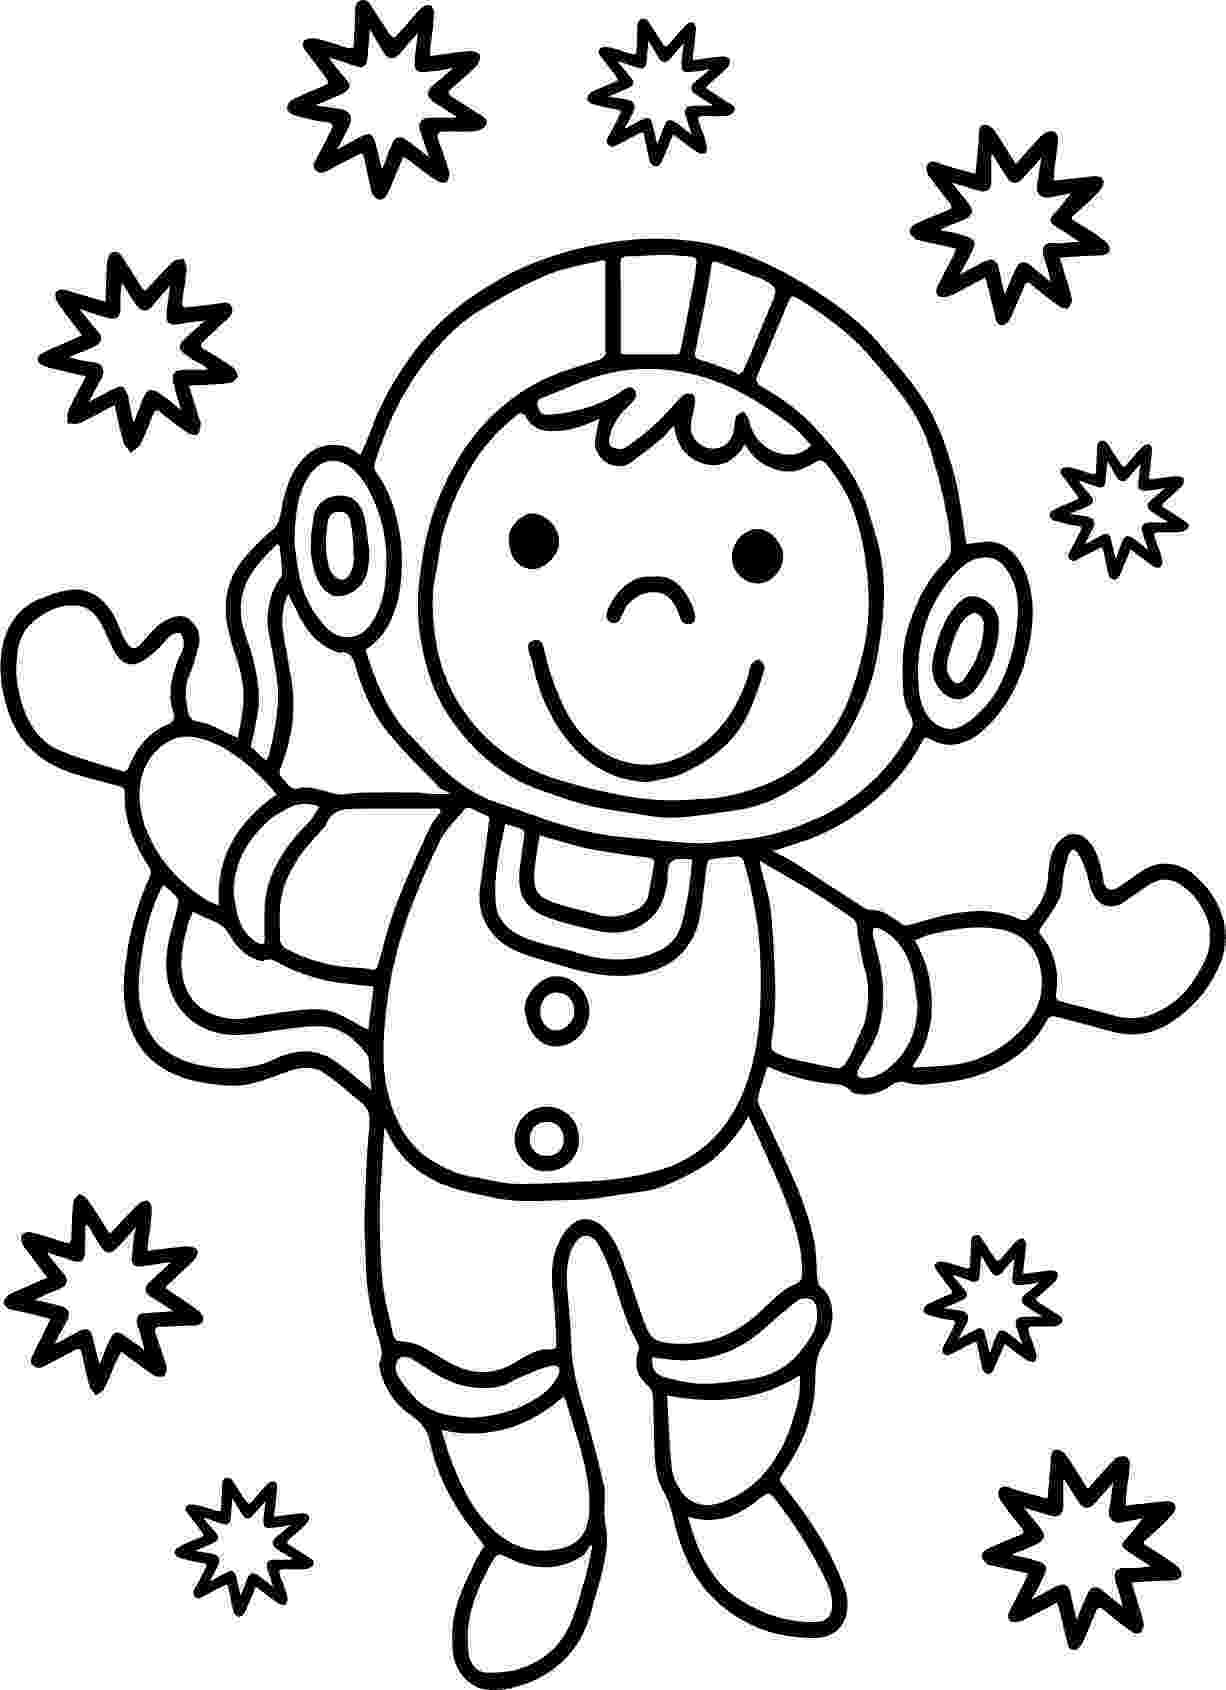 coloring pages of astronauts astronaut coloring pages getcoloringpagescom of coloring pages astronauts 